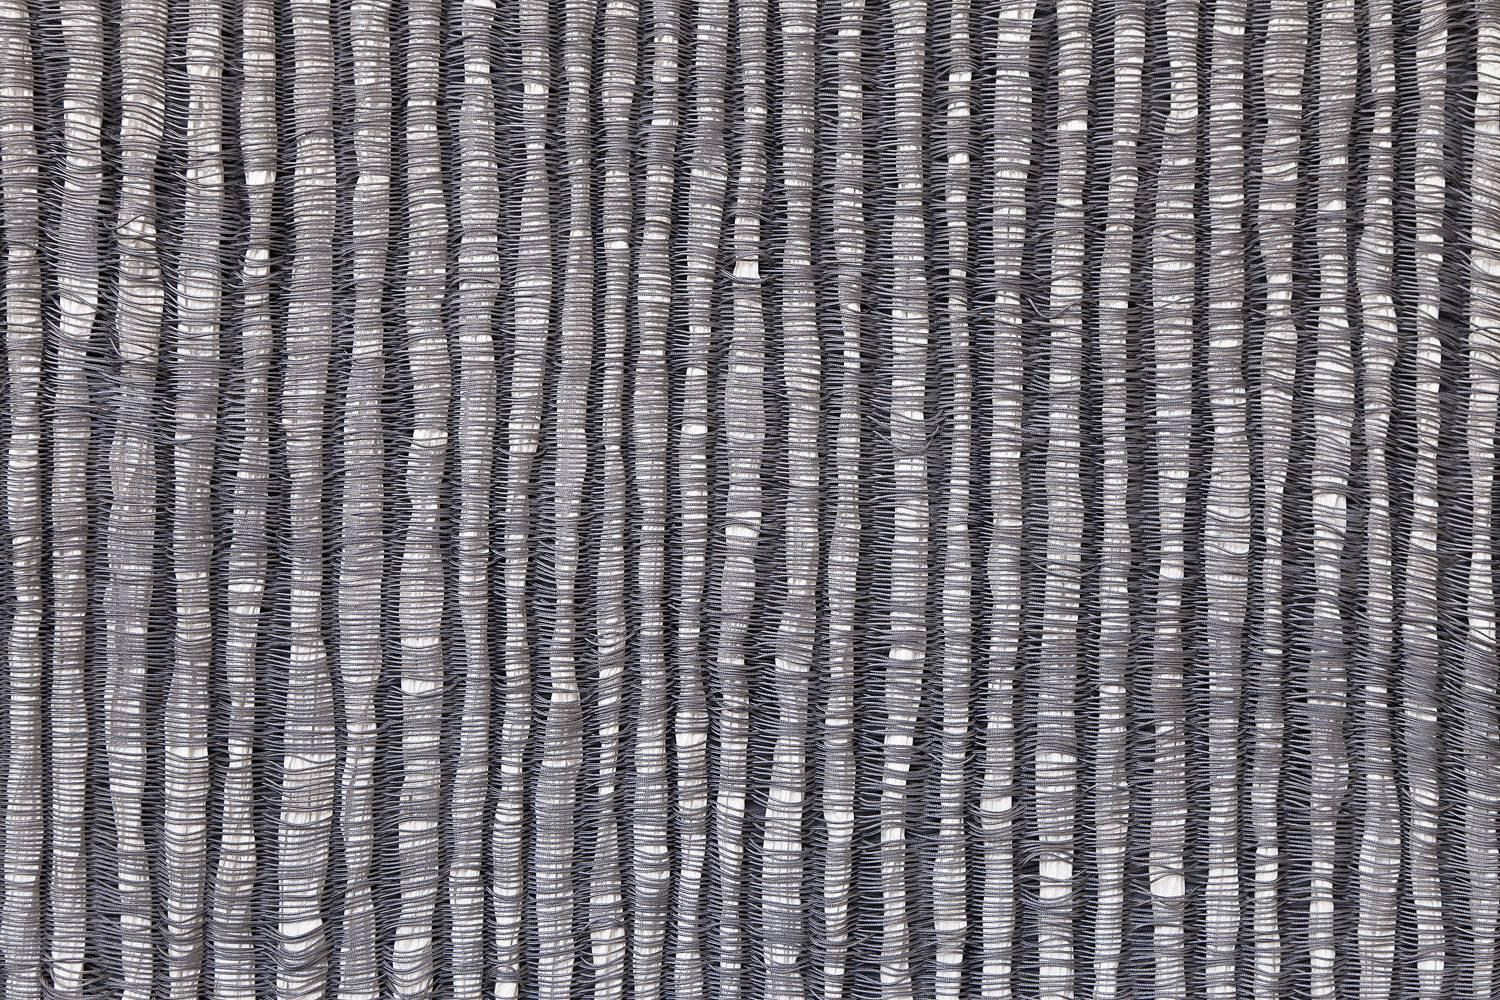 American Contemporary Weaving Textile Fiber Art, Gray Waves by Mimi Jung For Sale